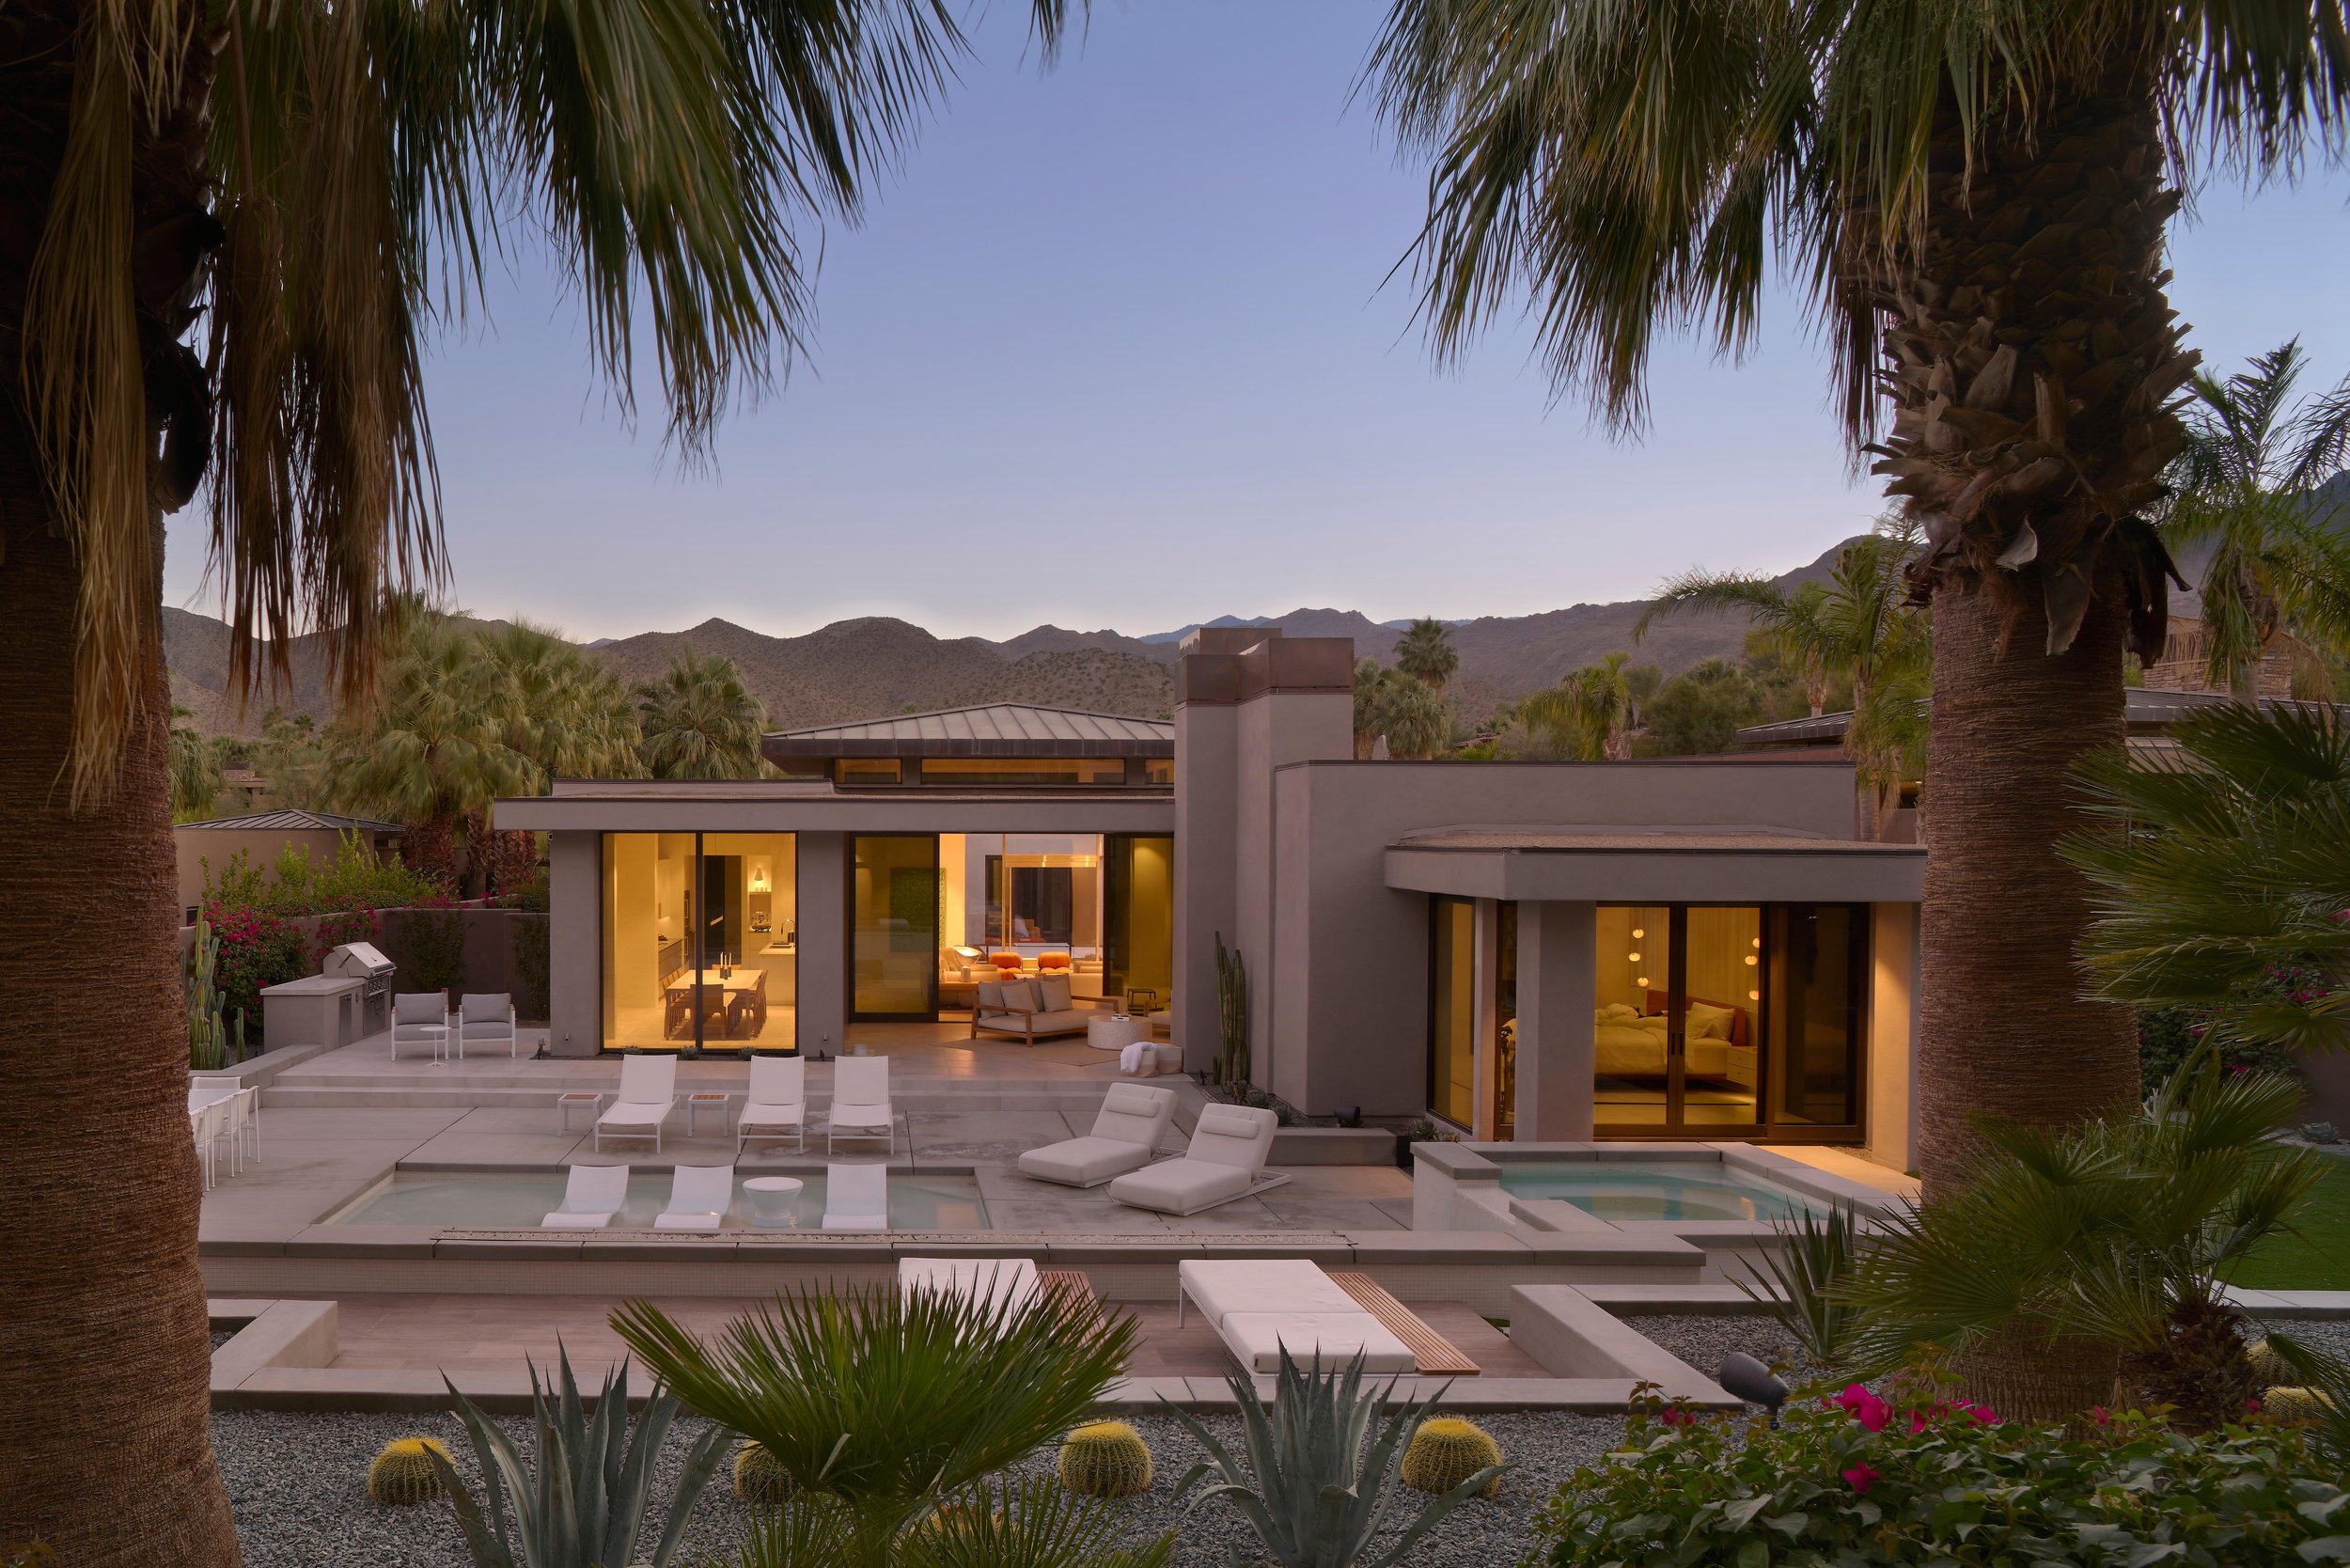  Location: Palm Desert, California / Size: 400 sq m / Original House 2004, Renovations Completed: 2022  Photos by: silentsama.com / Construction by: gregraabconstructioninc.com   